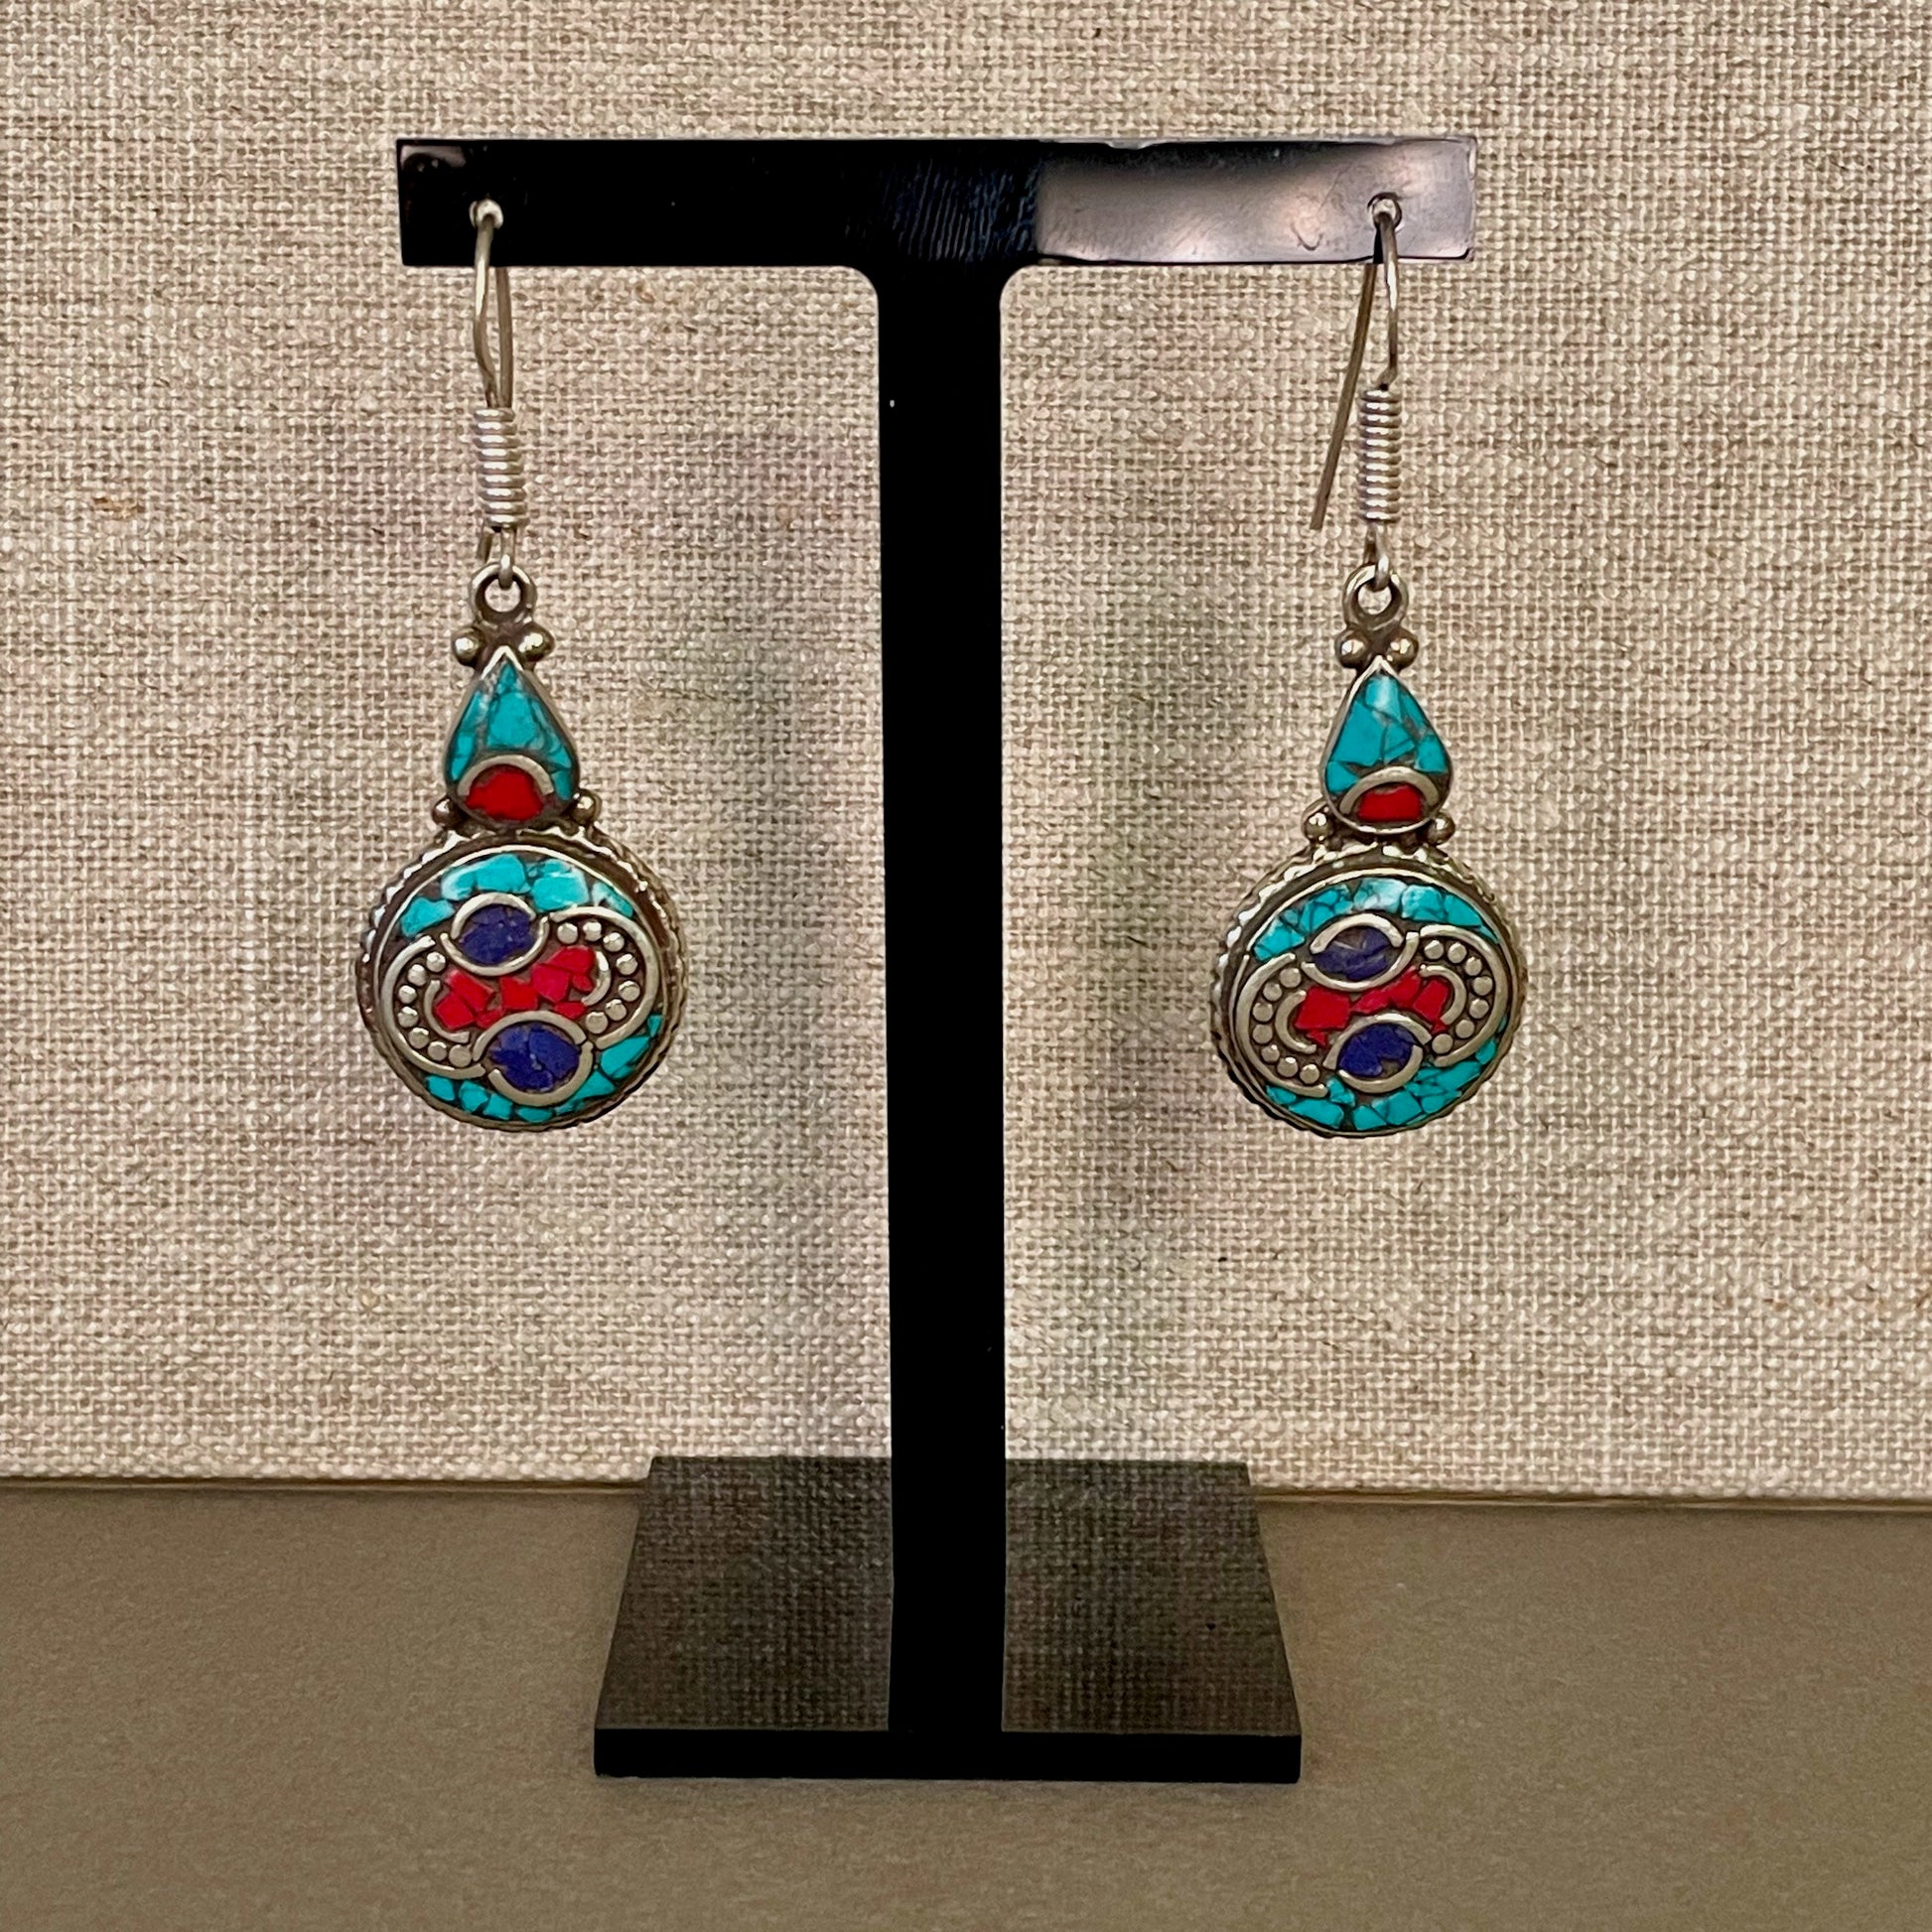 Berber Silver Turquoise, Blue & Red Stone Drop Earrings on stand